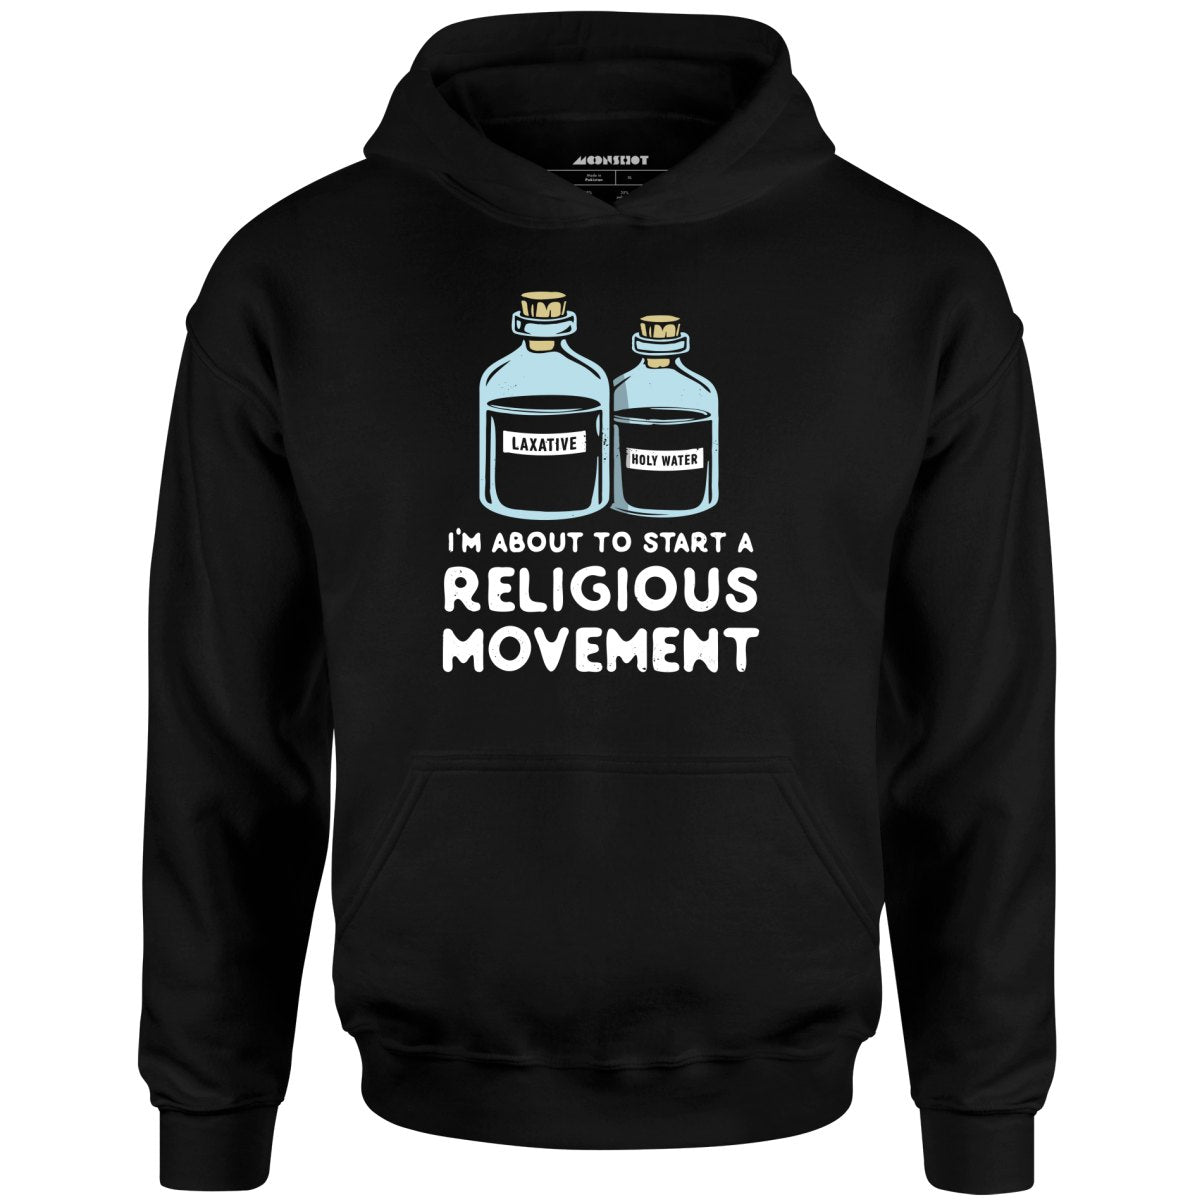 I'm About to Start a Religious Movement - Unisex Hoodie